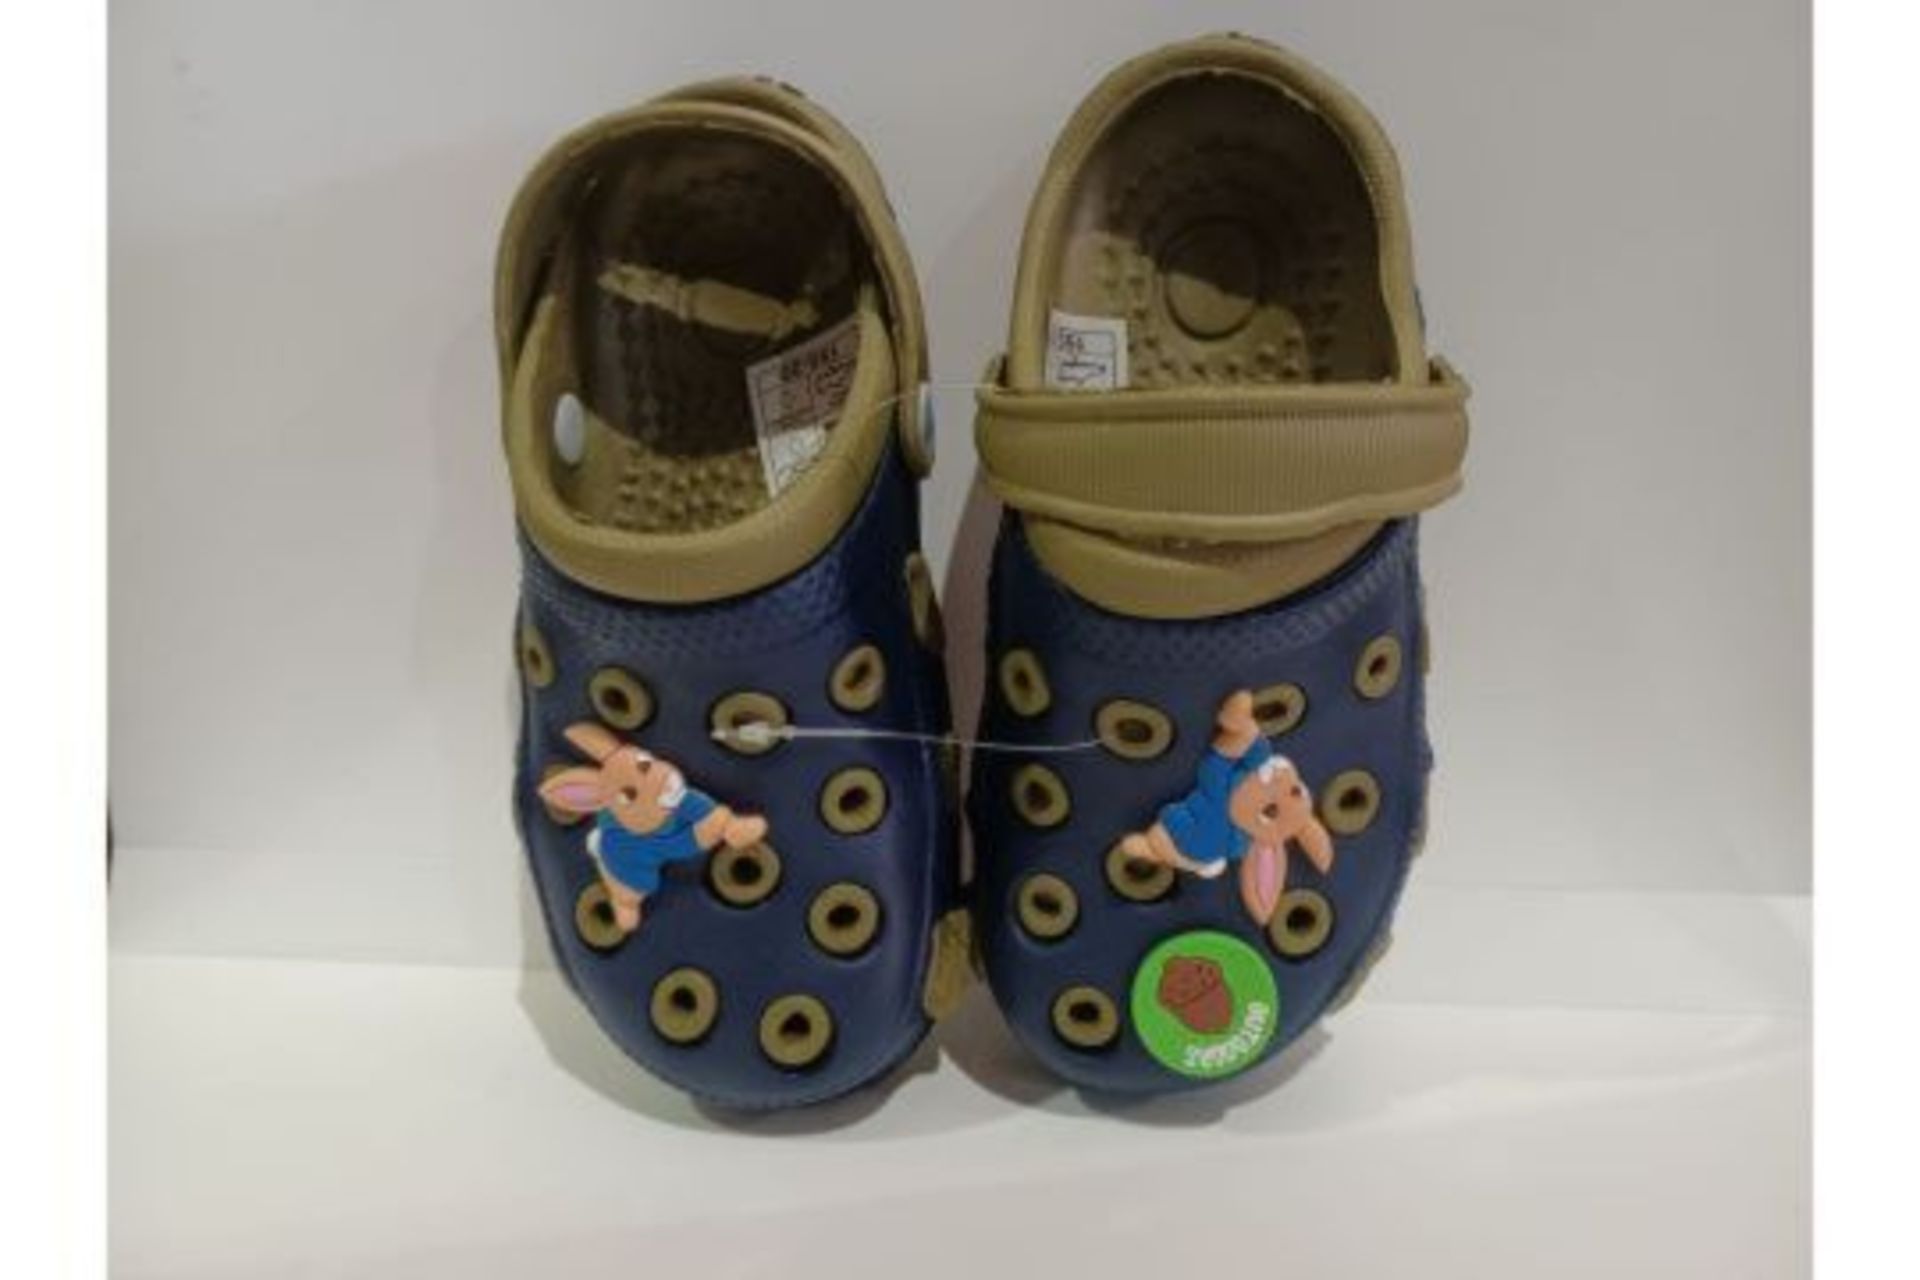 TRADE LOT 96 X NEW PAIRS OF PETER RABBIT & FRIENDS LILY BOBTAIL GARDEN CLOG CHILDRENS SHOES. SIZES